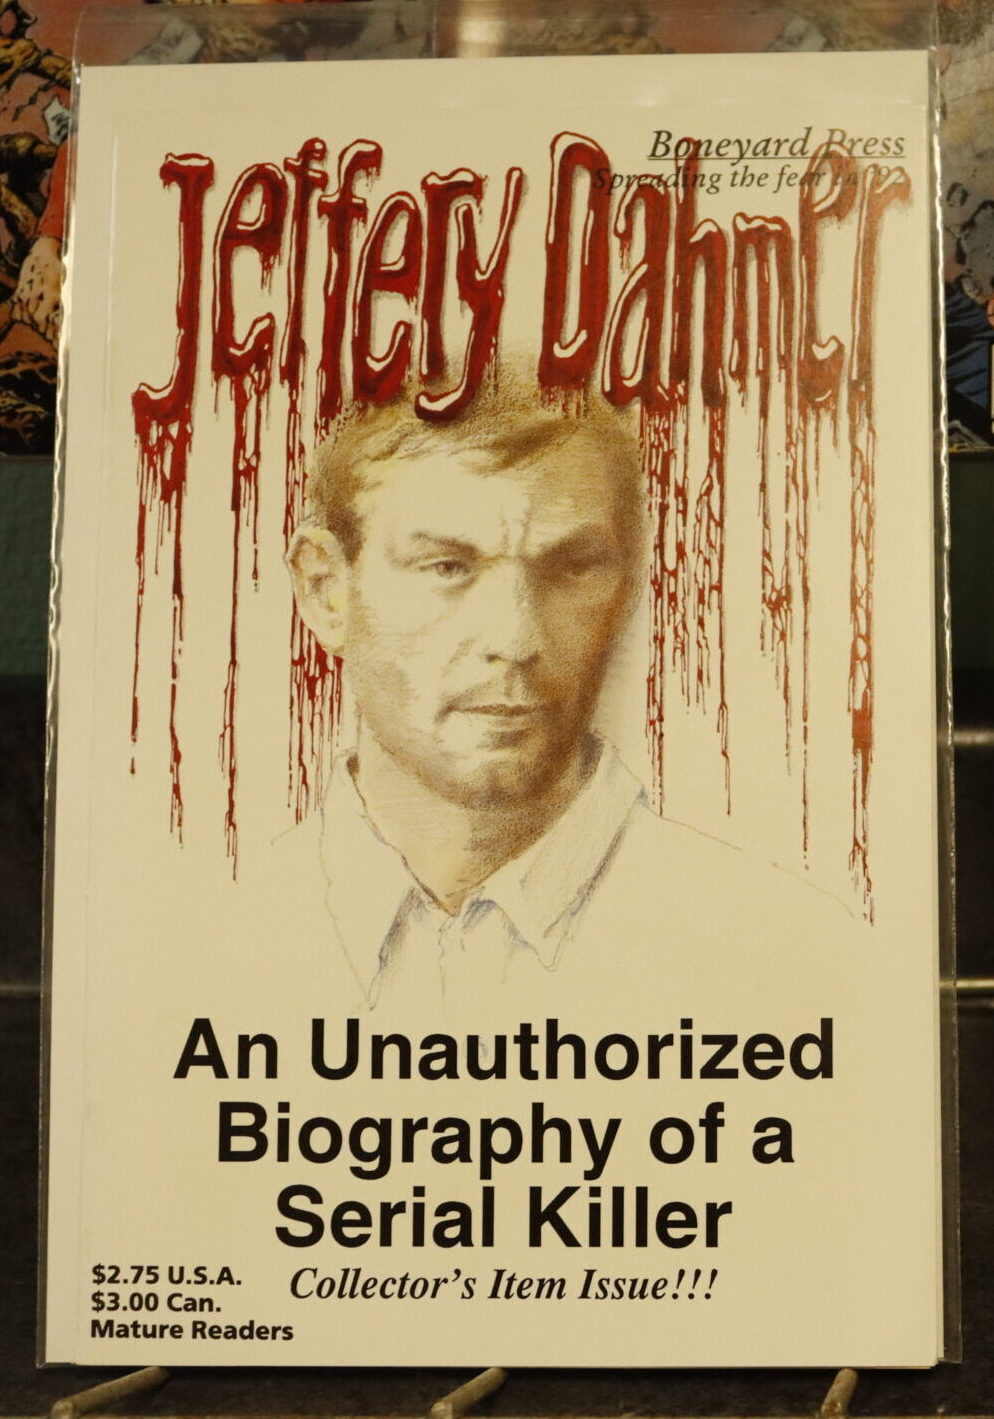 what is an unauthorized biography